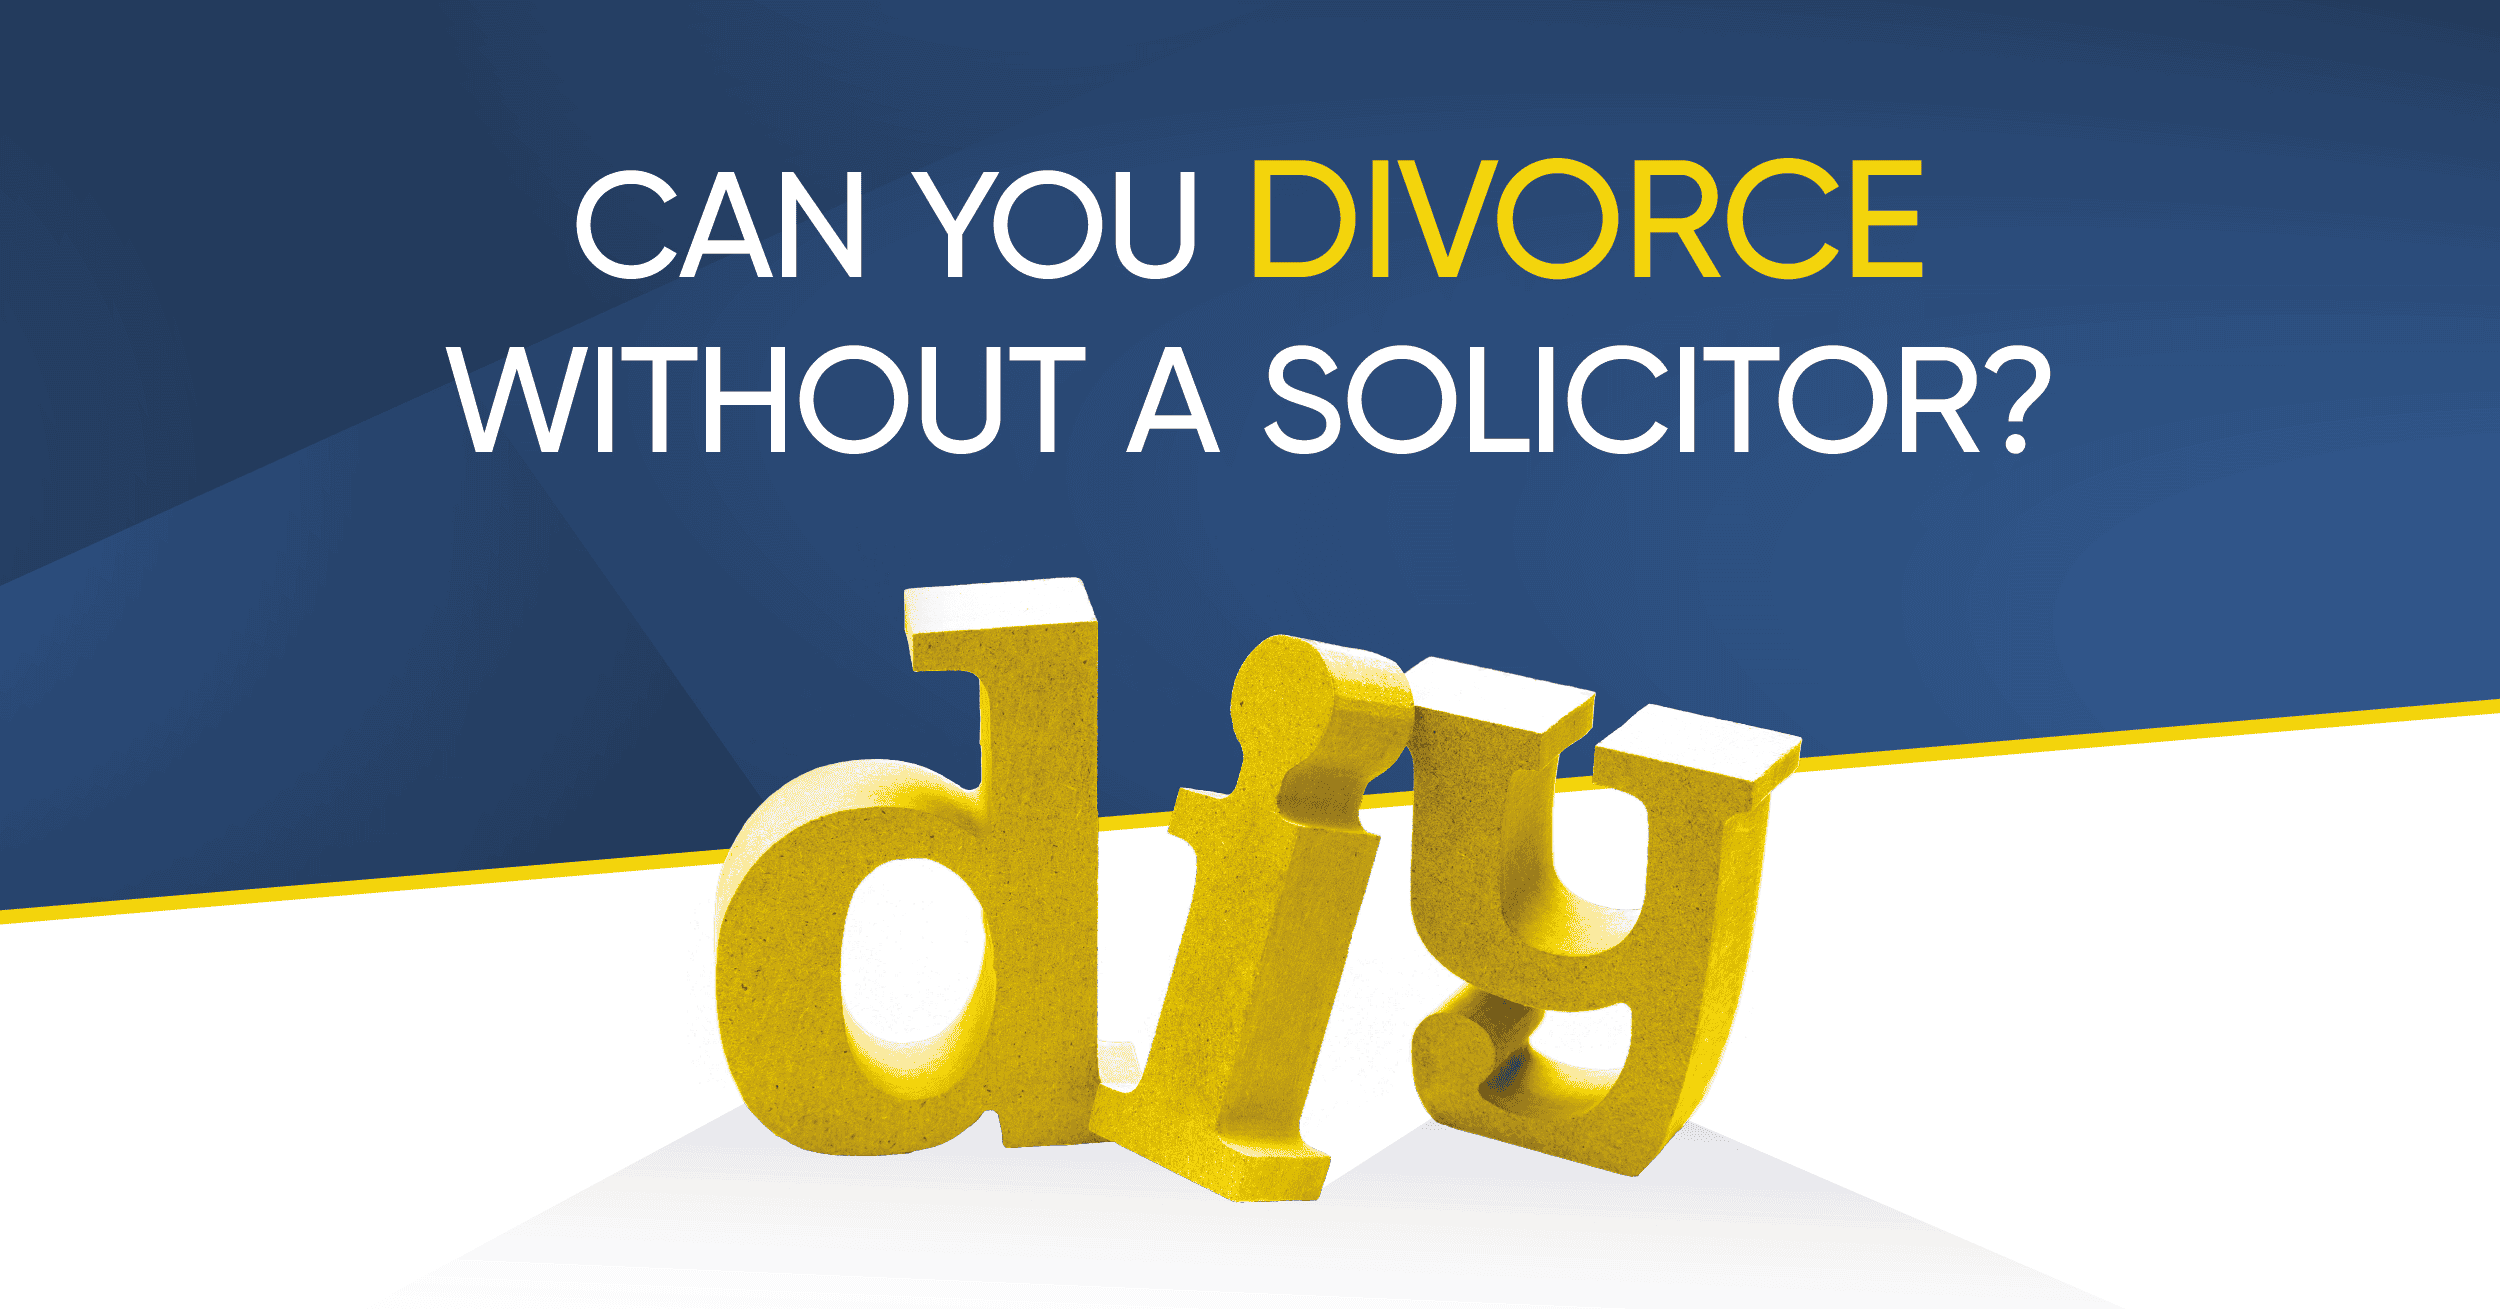 Can you divorce without a solicitor